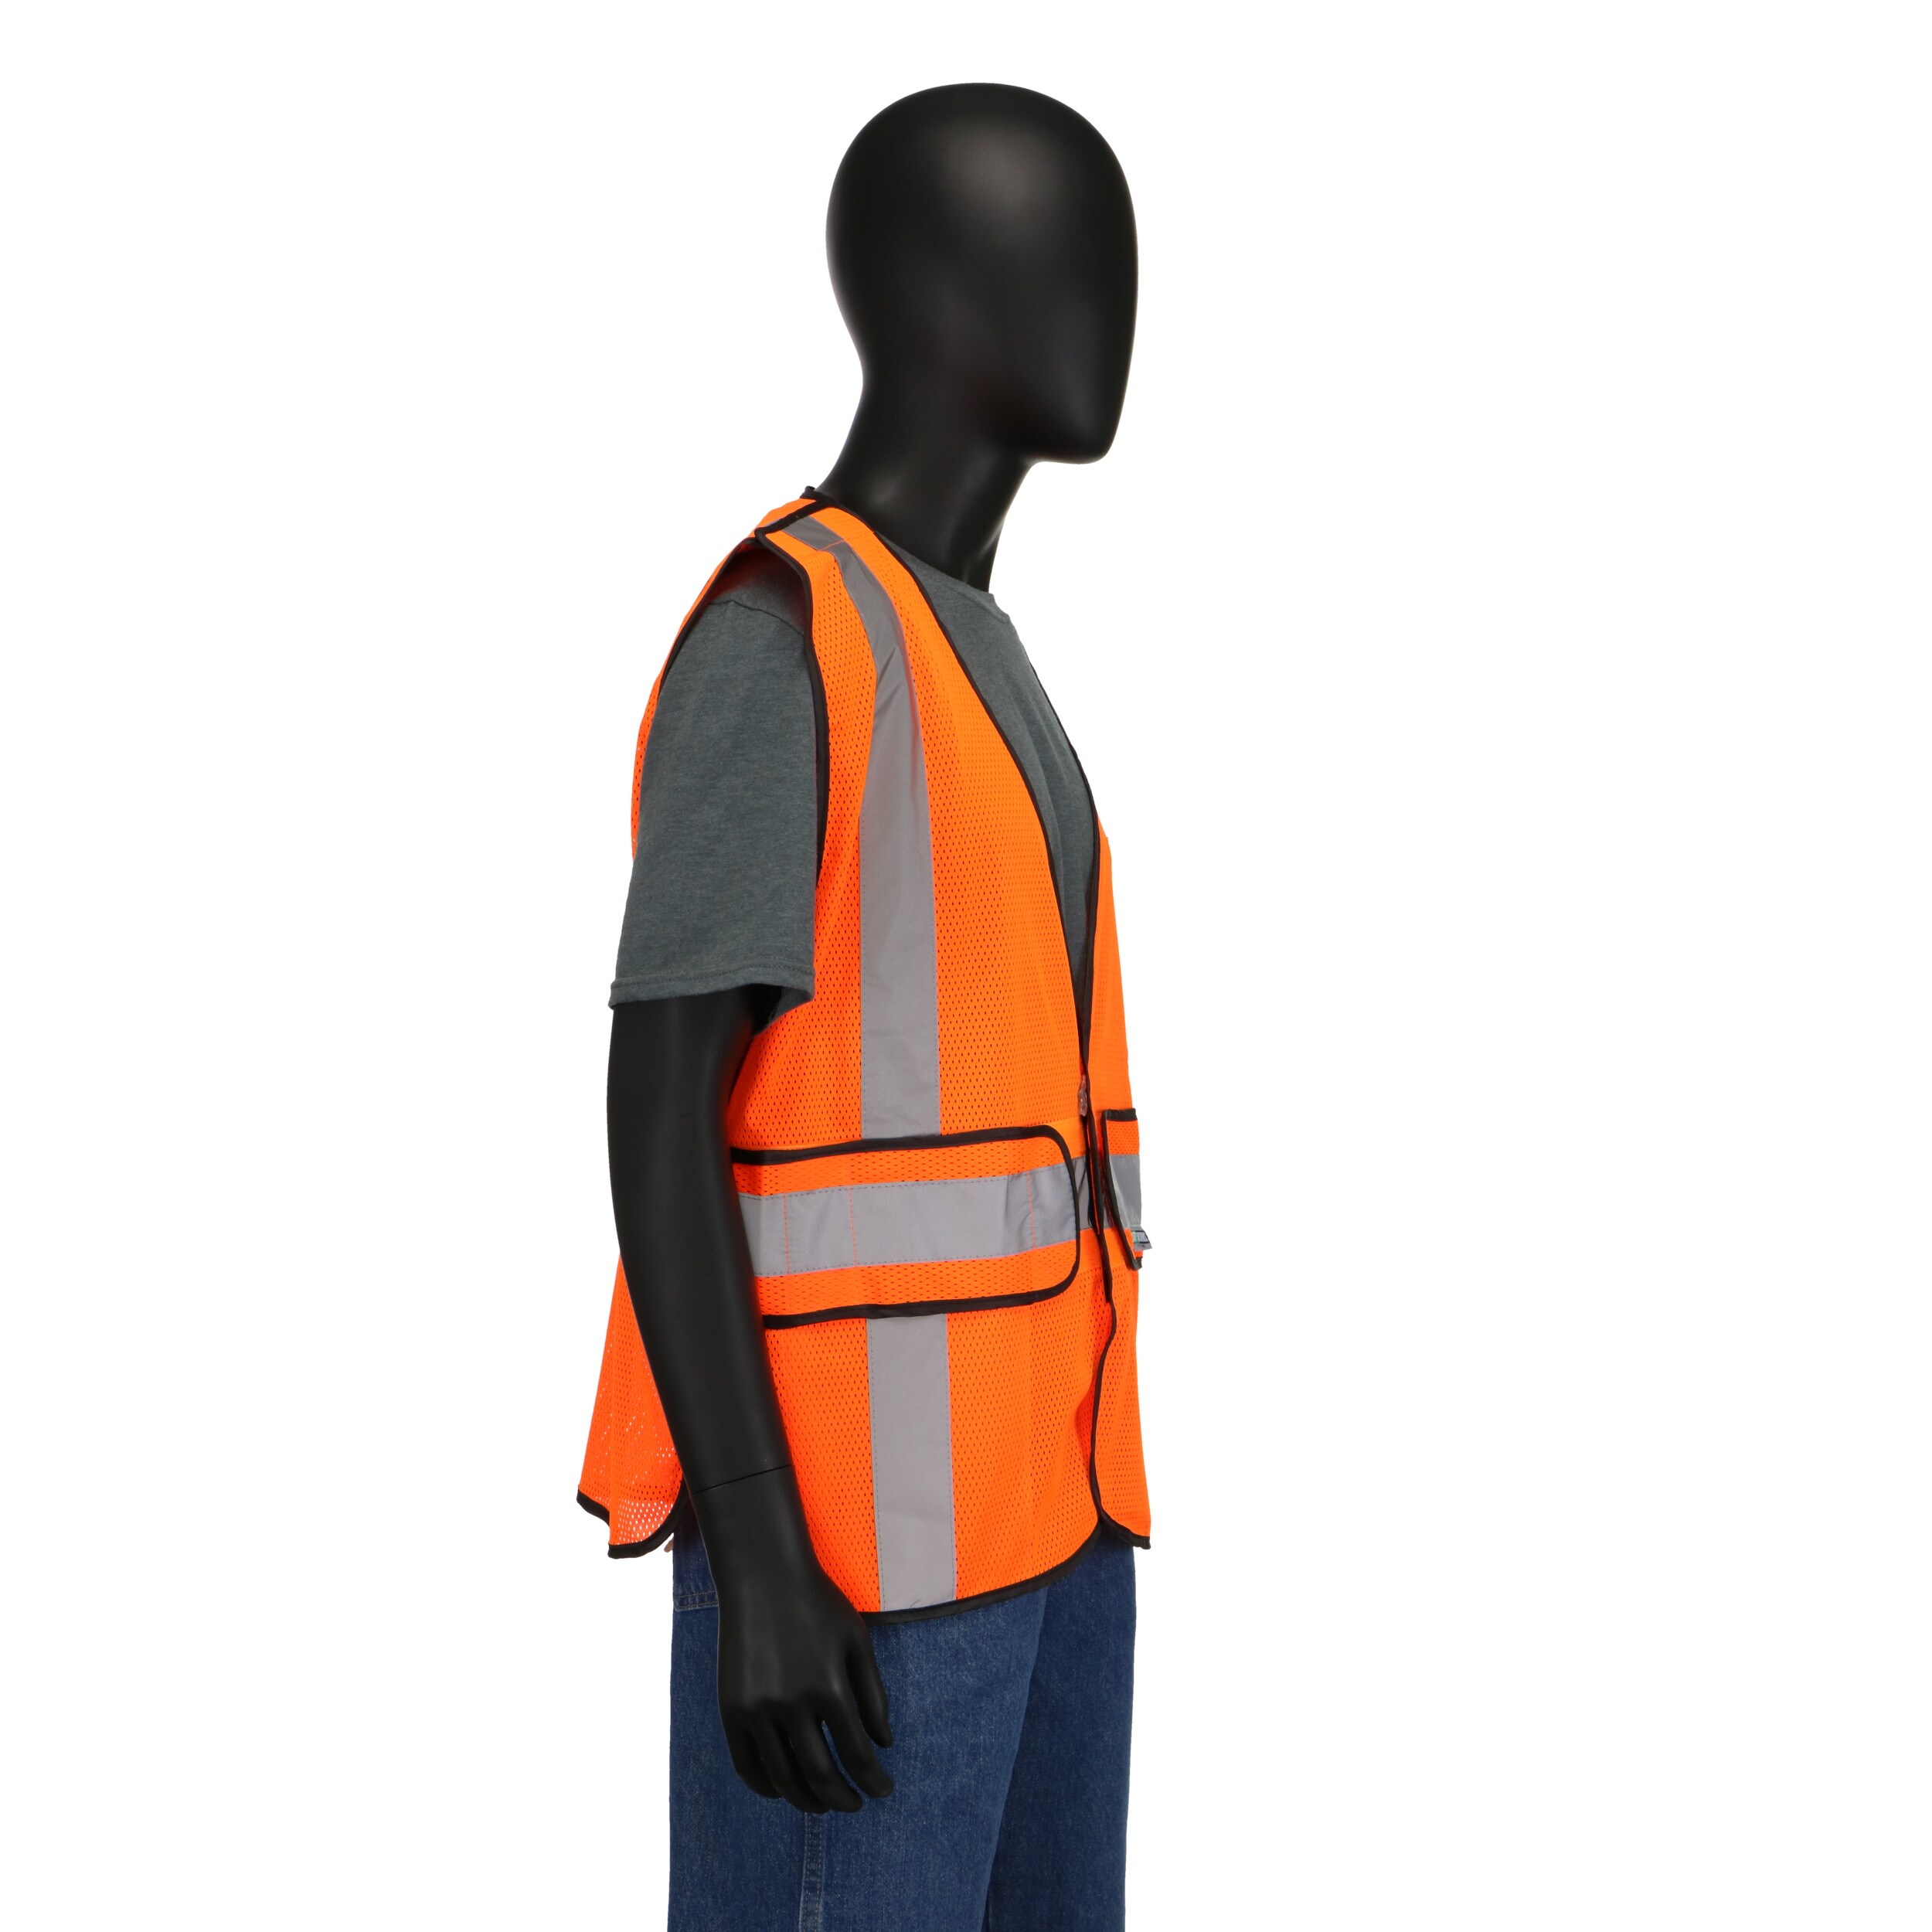 Coventry Hi Vis Visibility Orange Contractor Waistcoat Security Safety Vest 